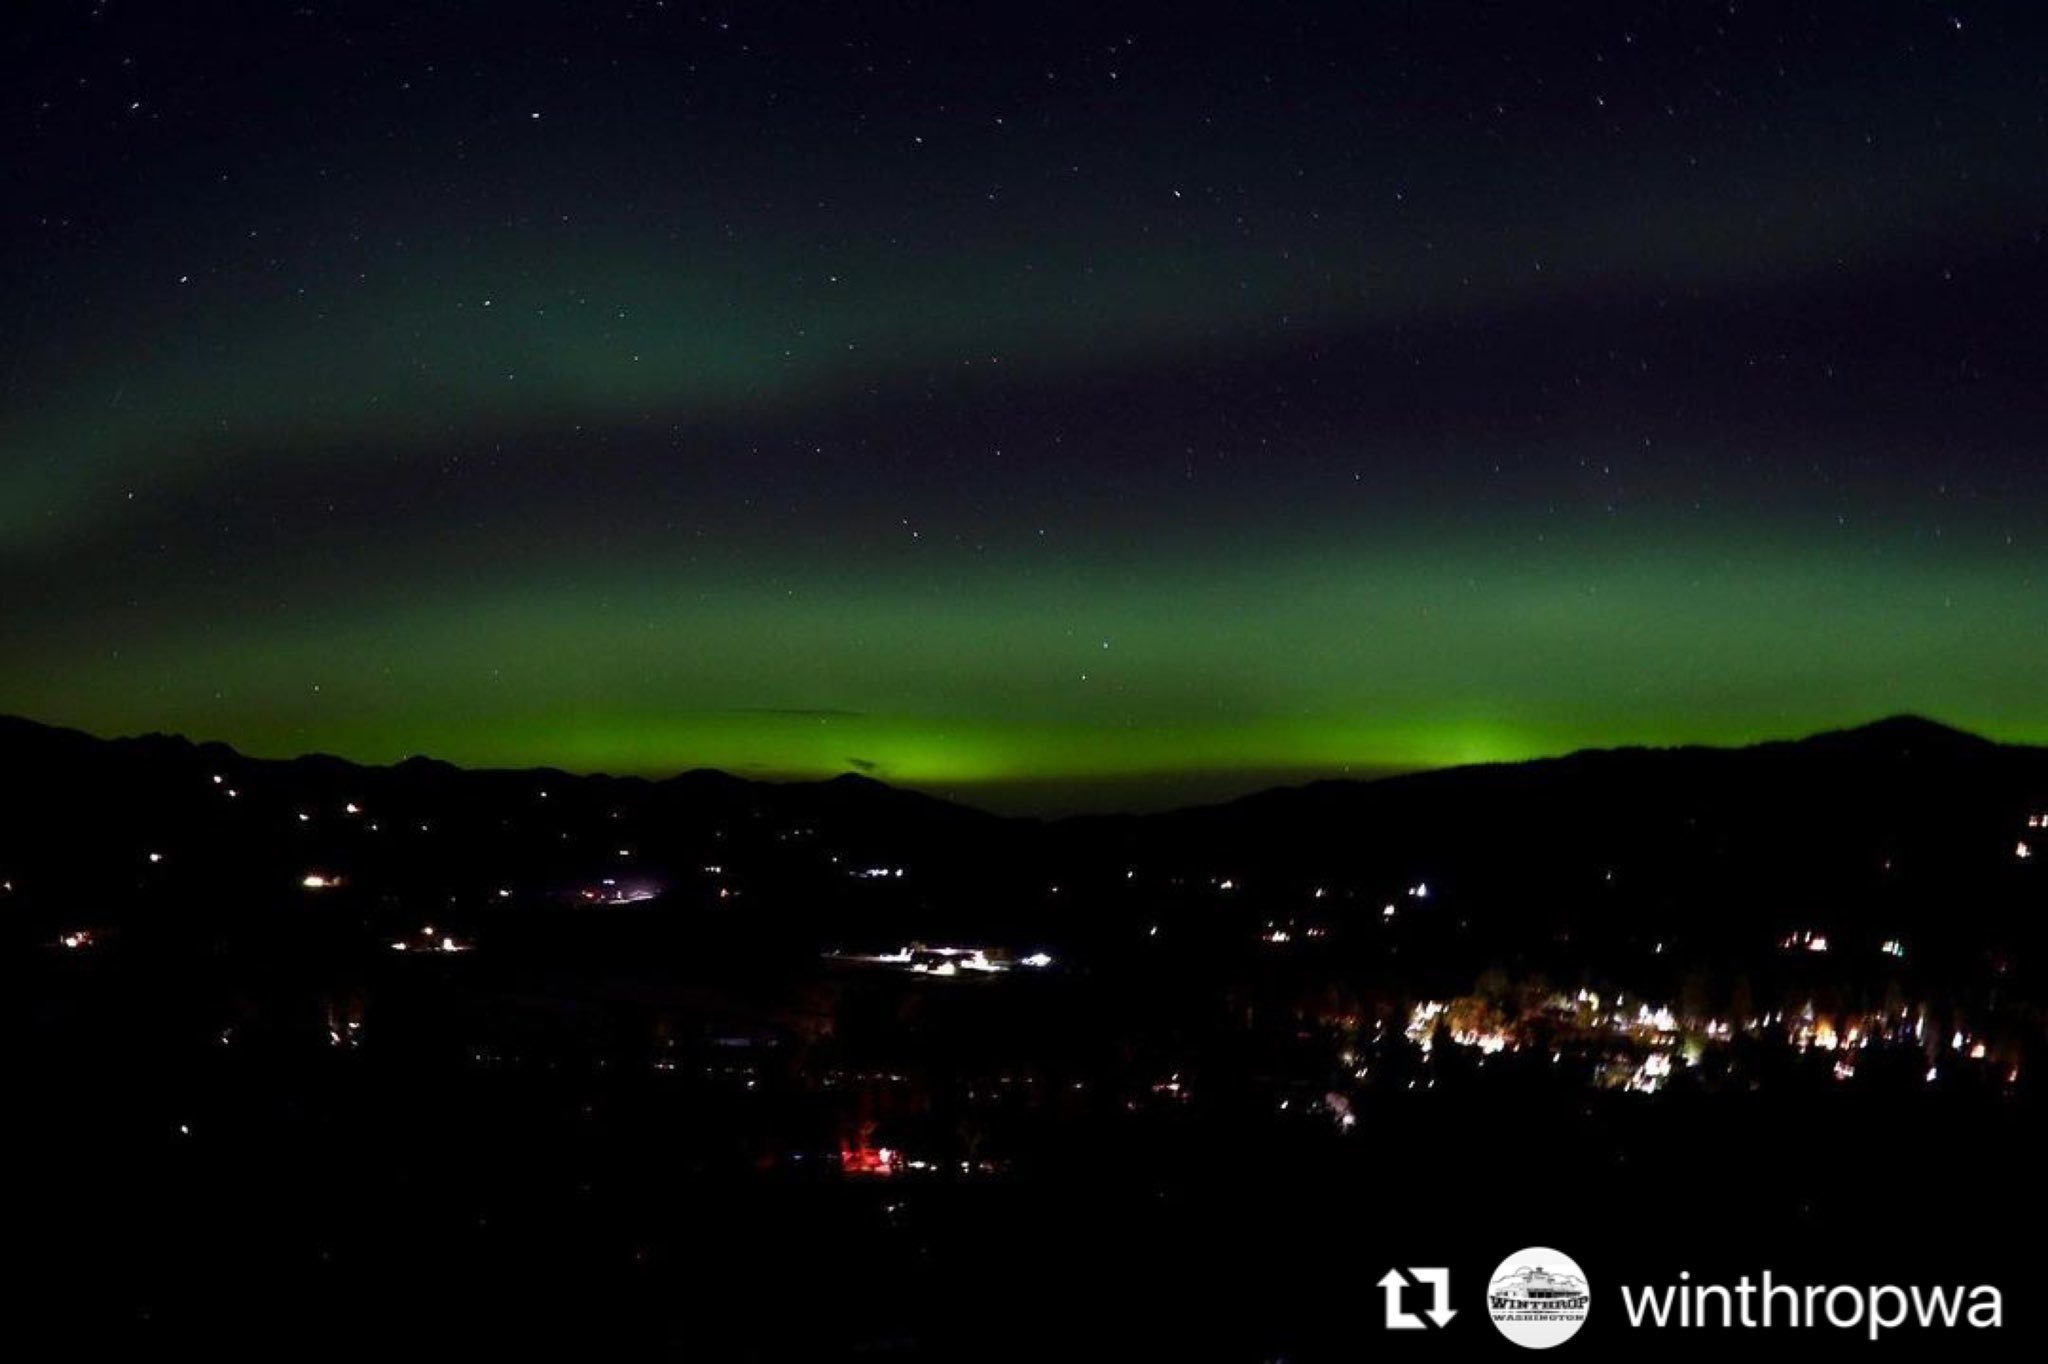 Twisp Washington Check Out This Gorgeous Shot Our Neighbors To The North Winthropwa Took Of Monday Night S Northernlights We Are In Constant Awe Of The Natural Beauty Seen In